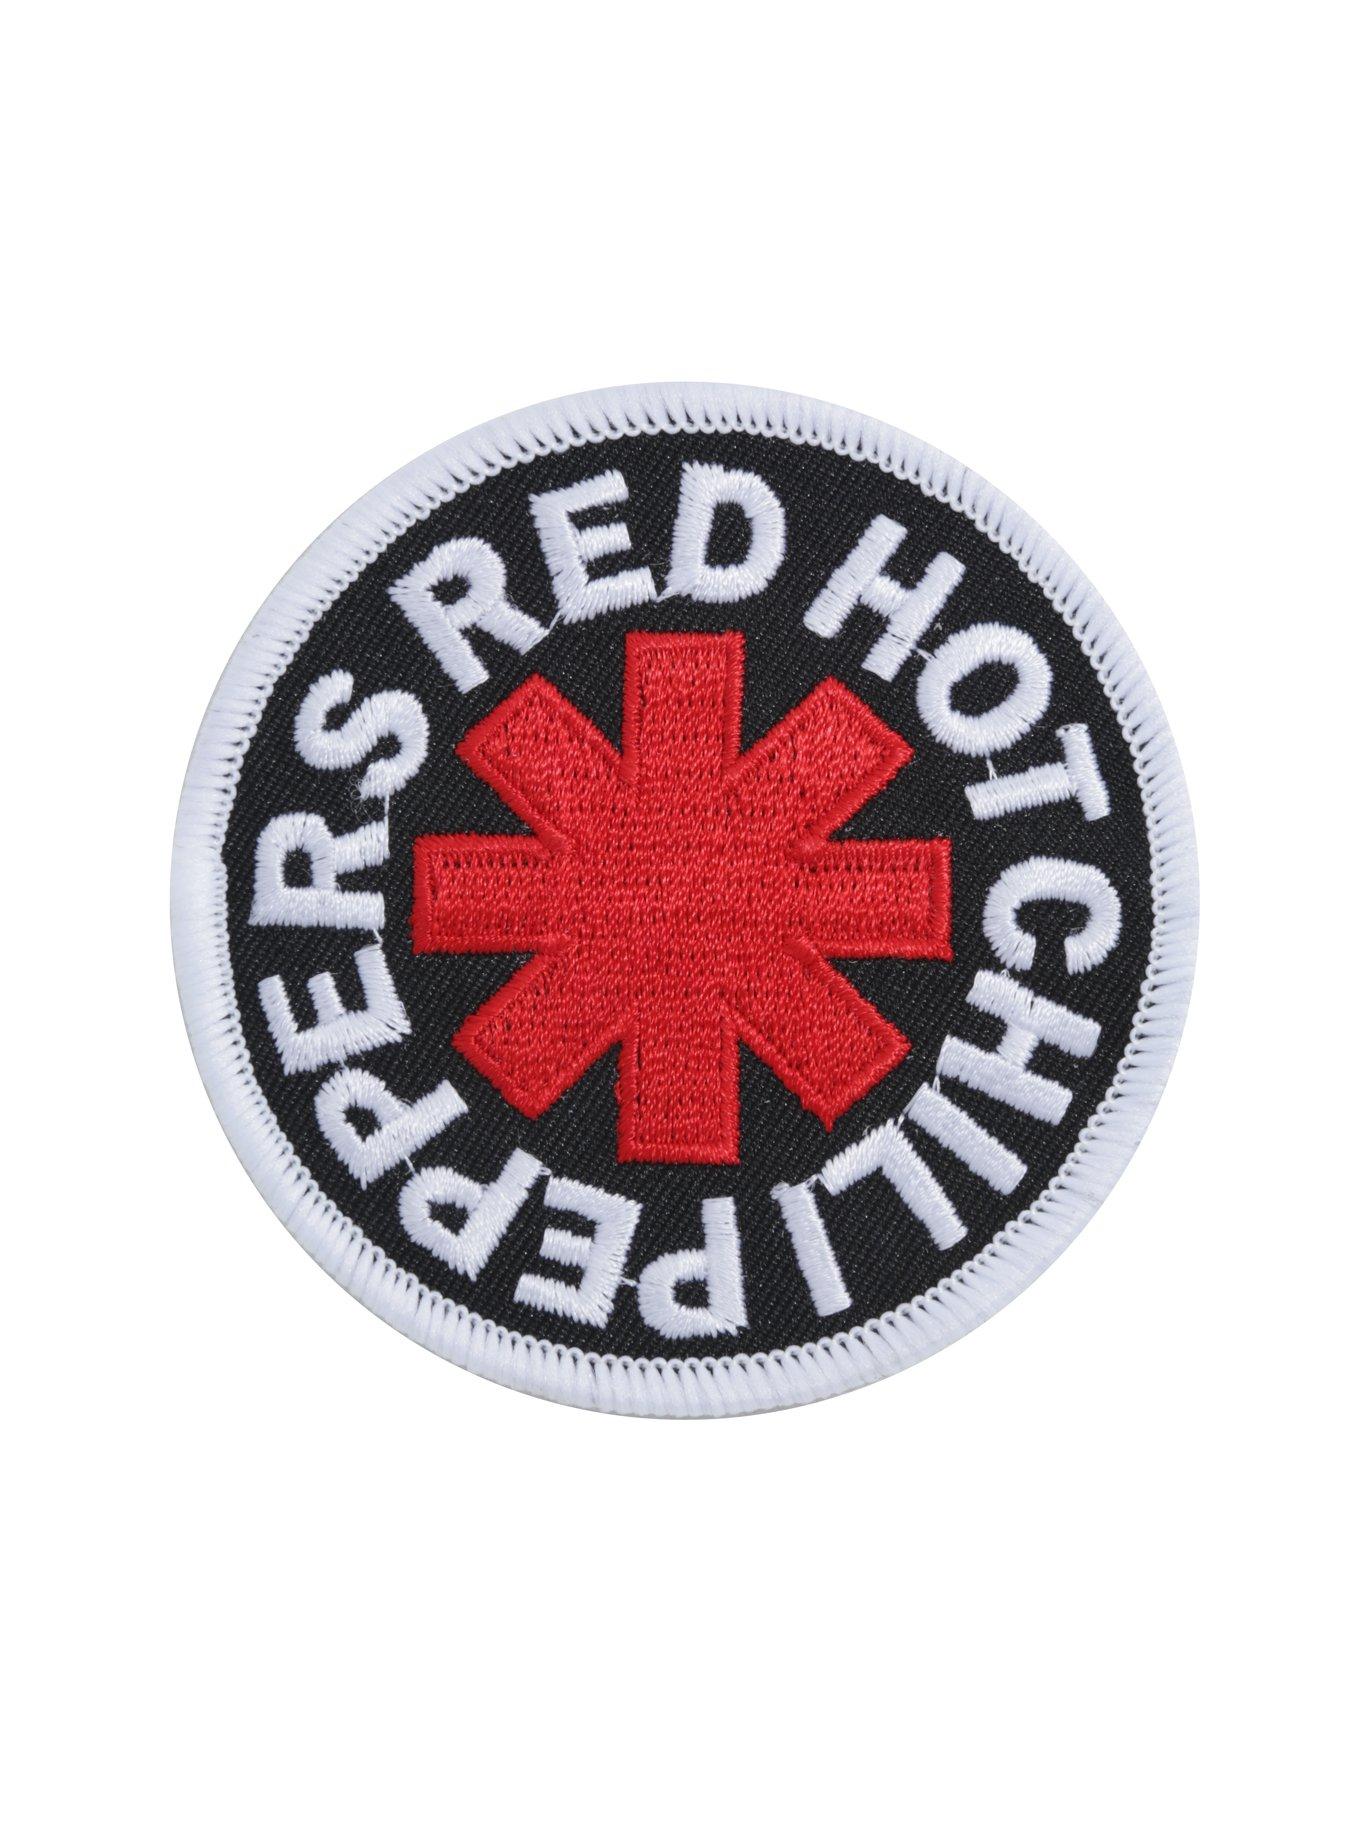 Red Hot Chili Peppers Rock Patch Patches~2 Types~Embroidered Applique~Sew Iron 